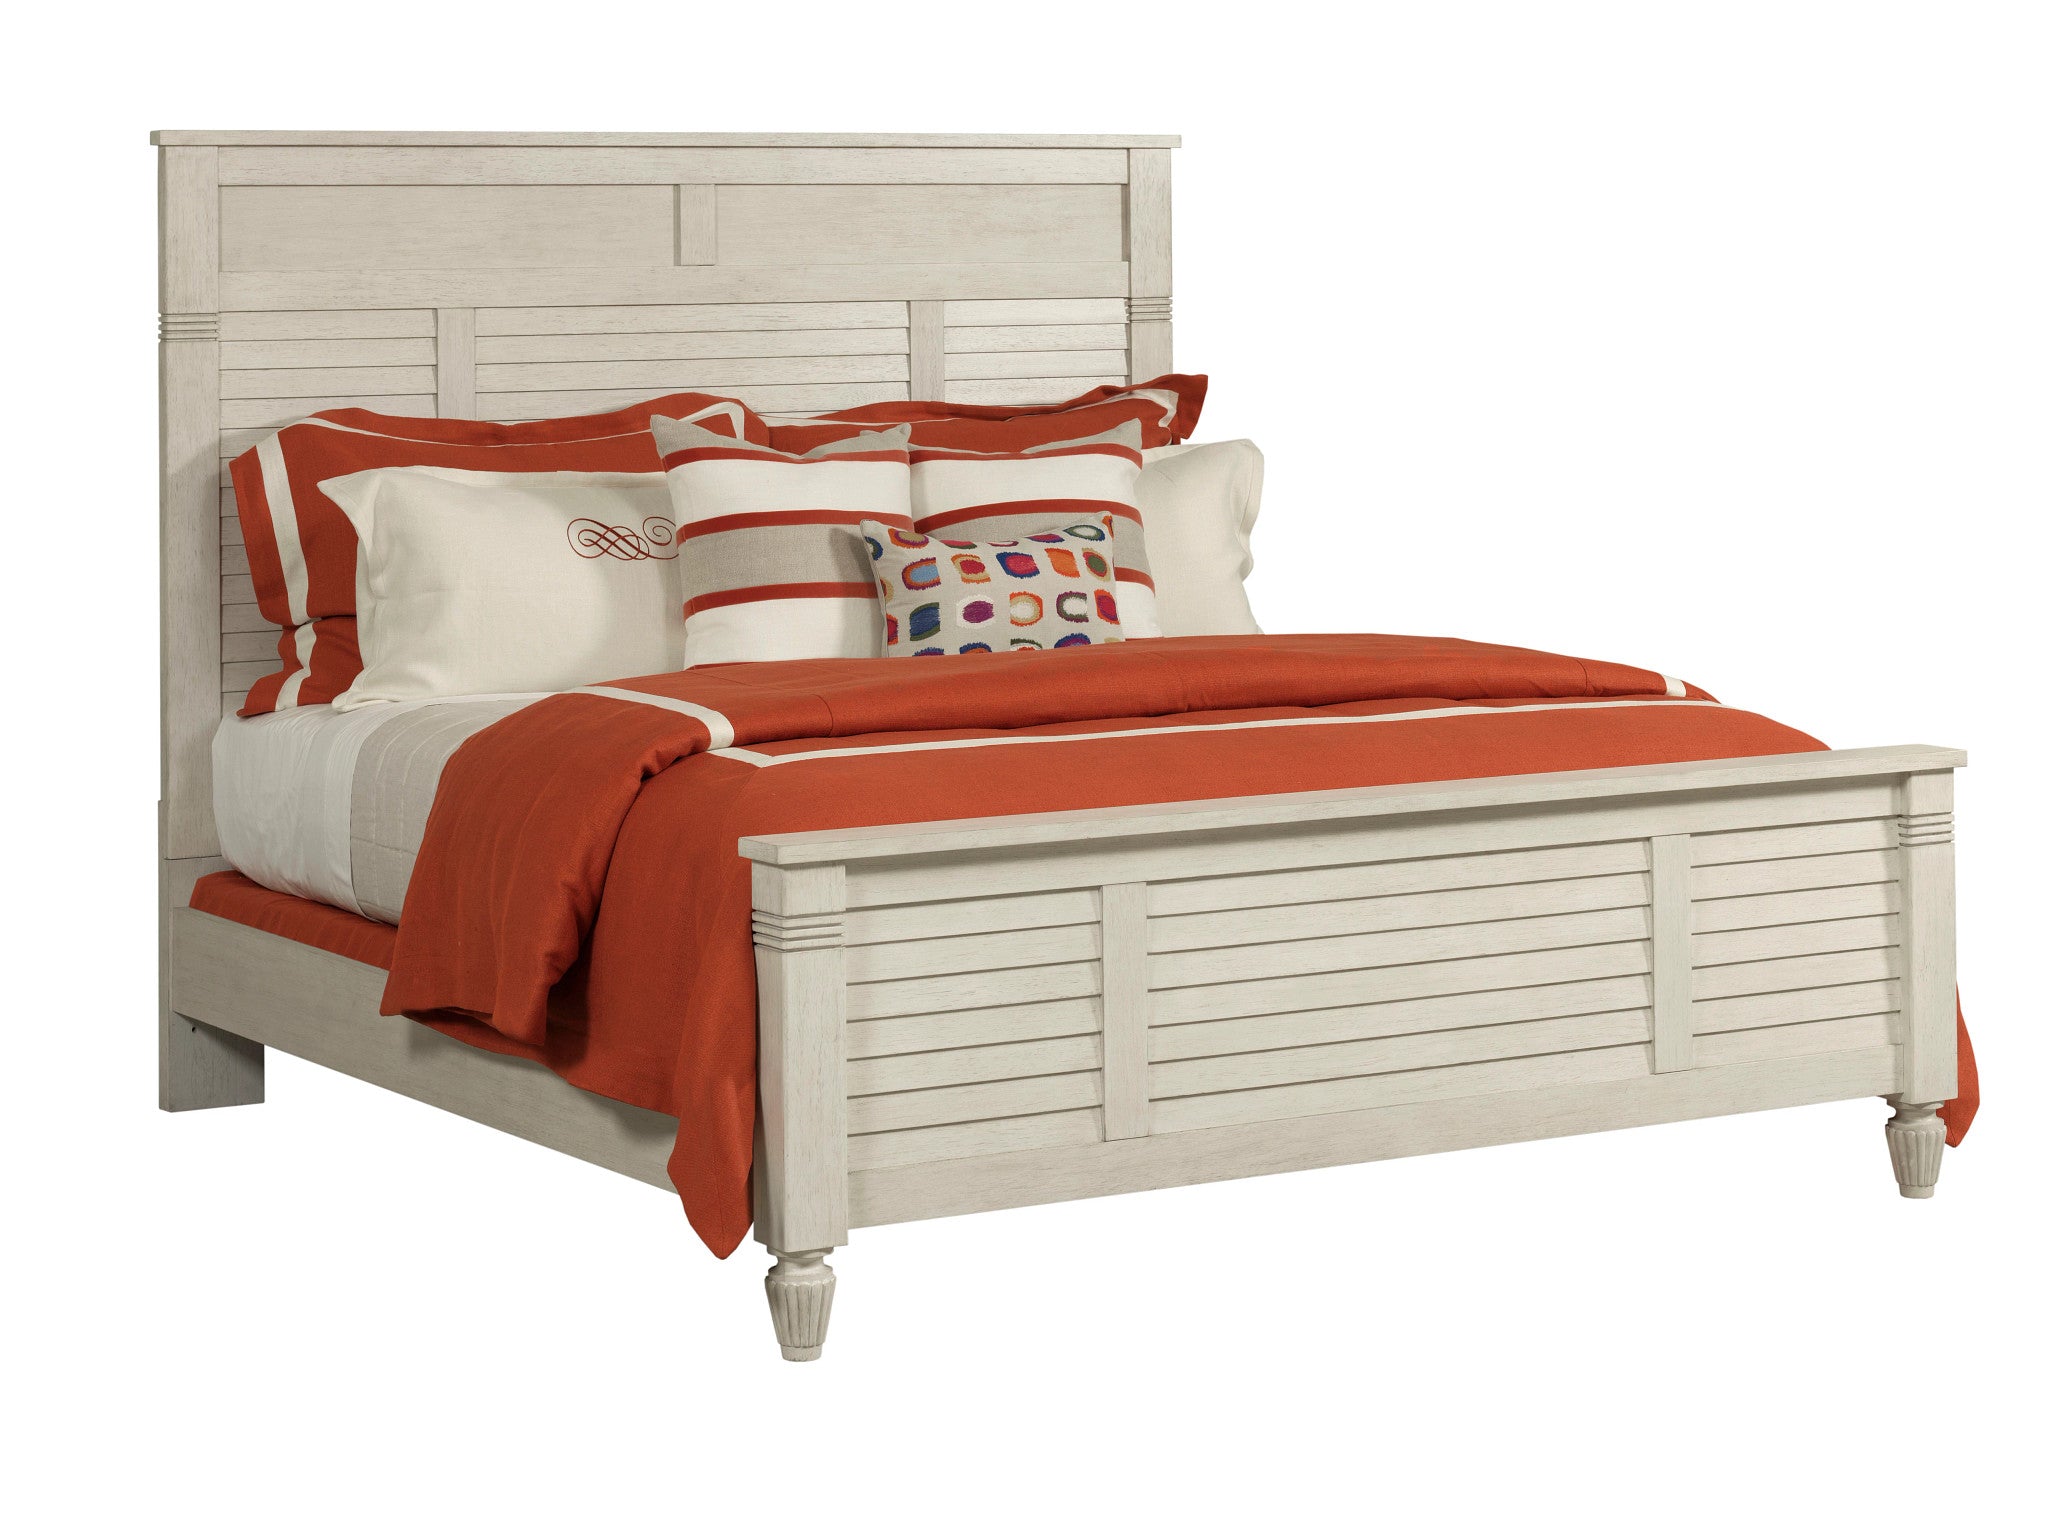 ACADIA CAL KING PANEL BED - COMPLETE